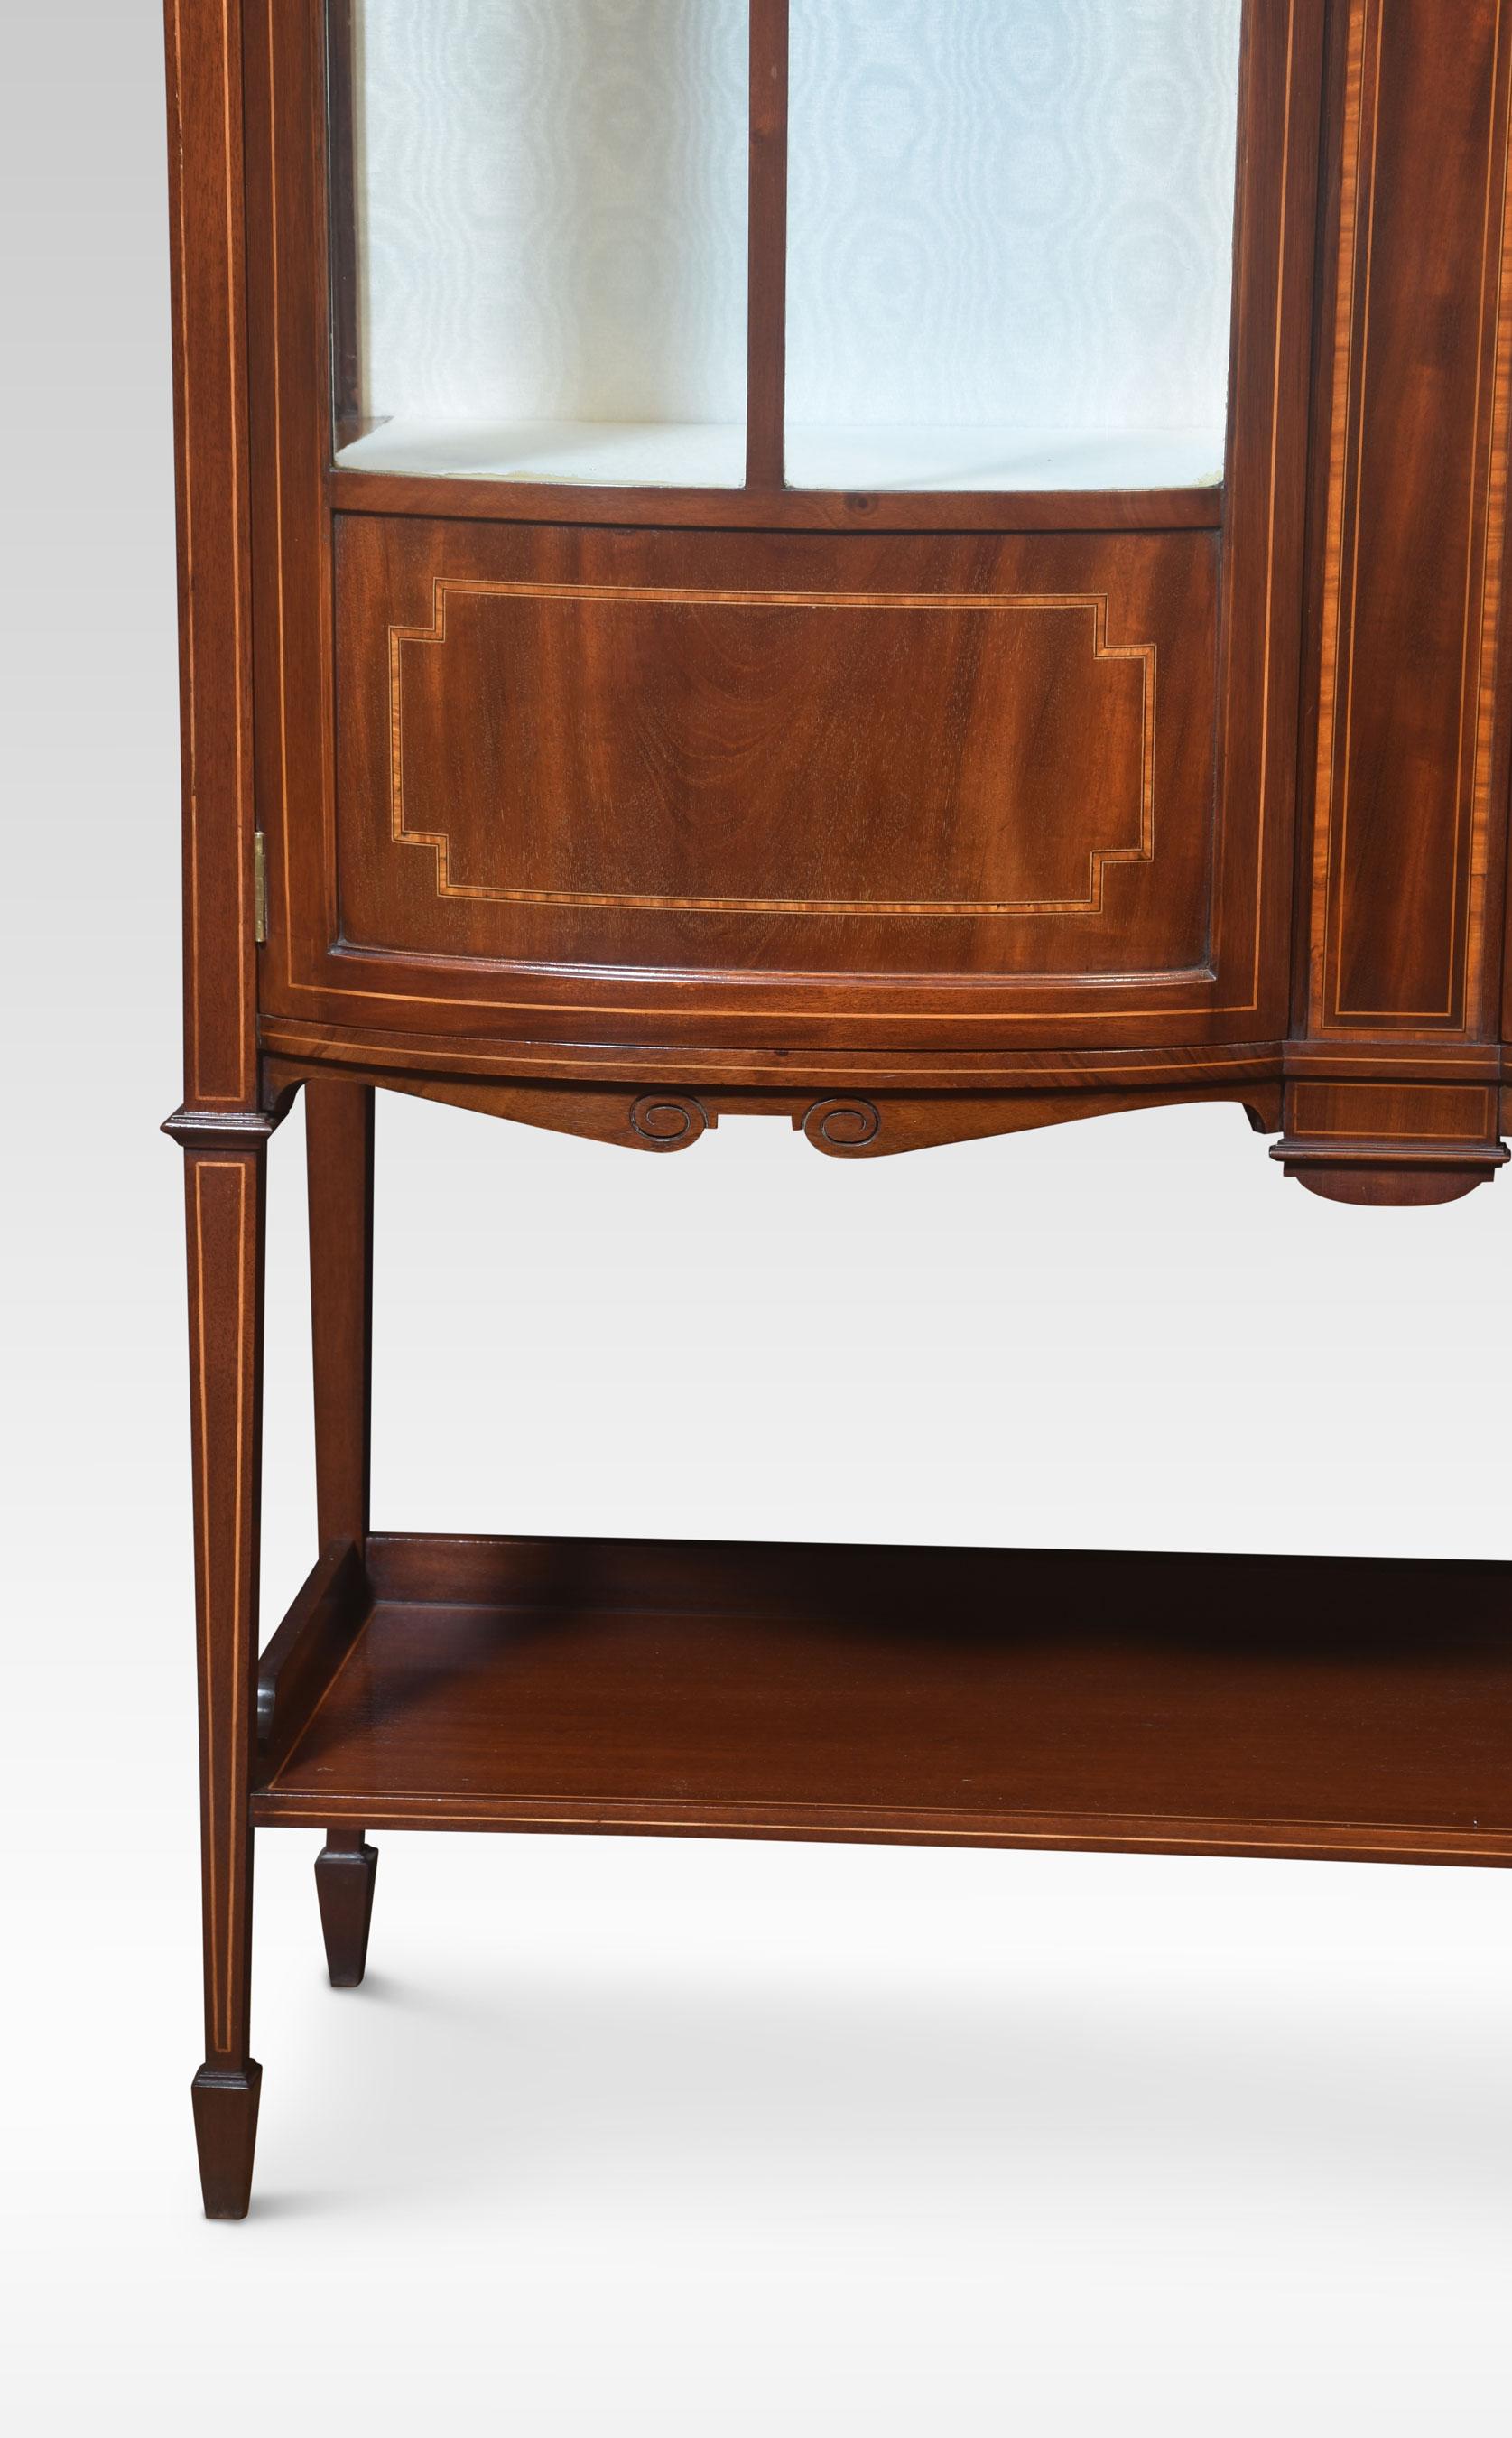 Mahogany bow front display cabinet. Having a pair of glazed doors enclosing shelved and watermark silk upholstered interior, flanked by glazed ends. All raised up on tapering supports united by under tier.
Dimensions
Height 70 Inches
Width 48